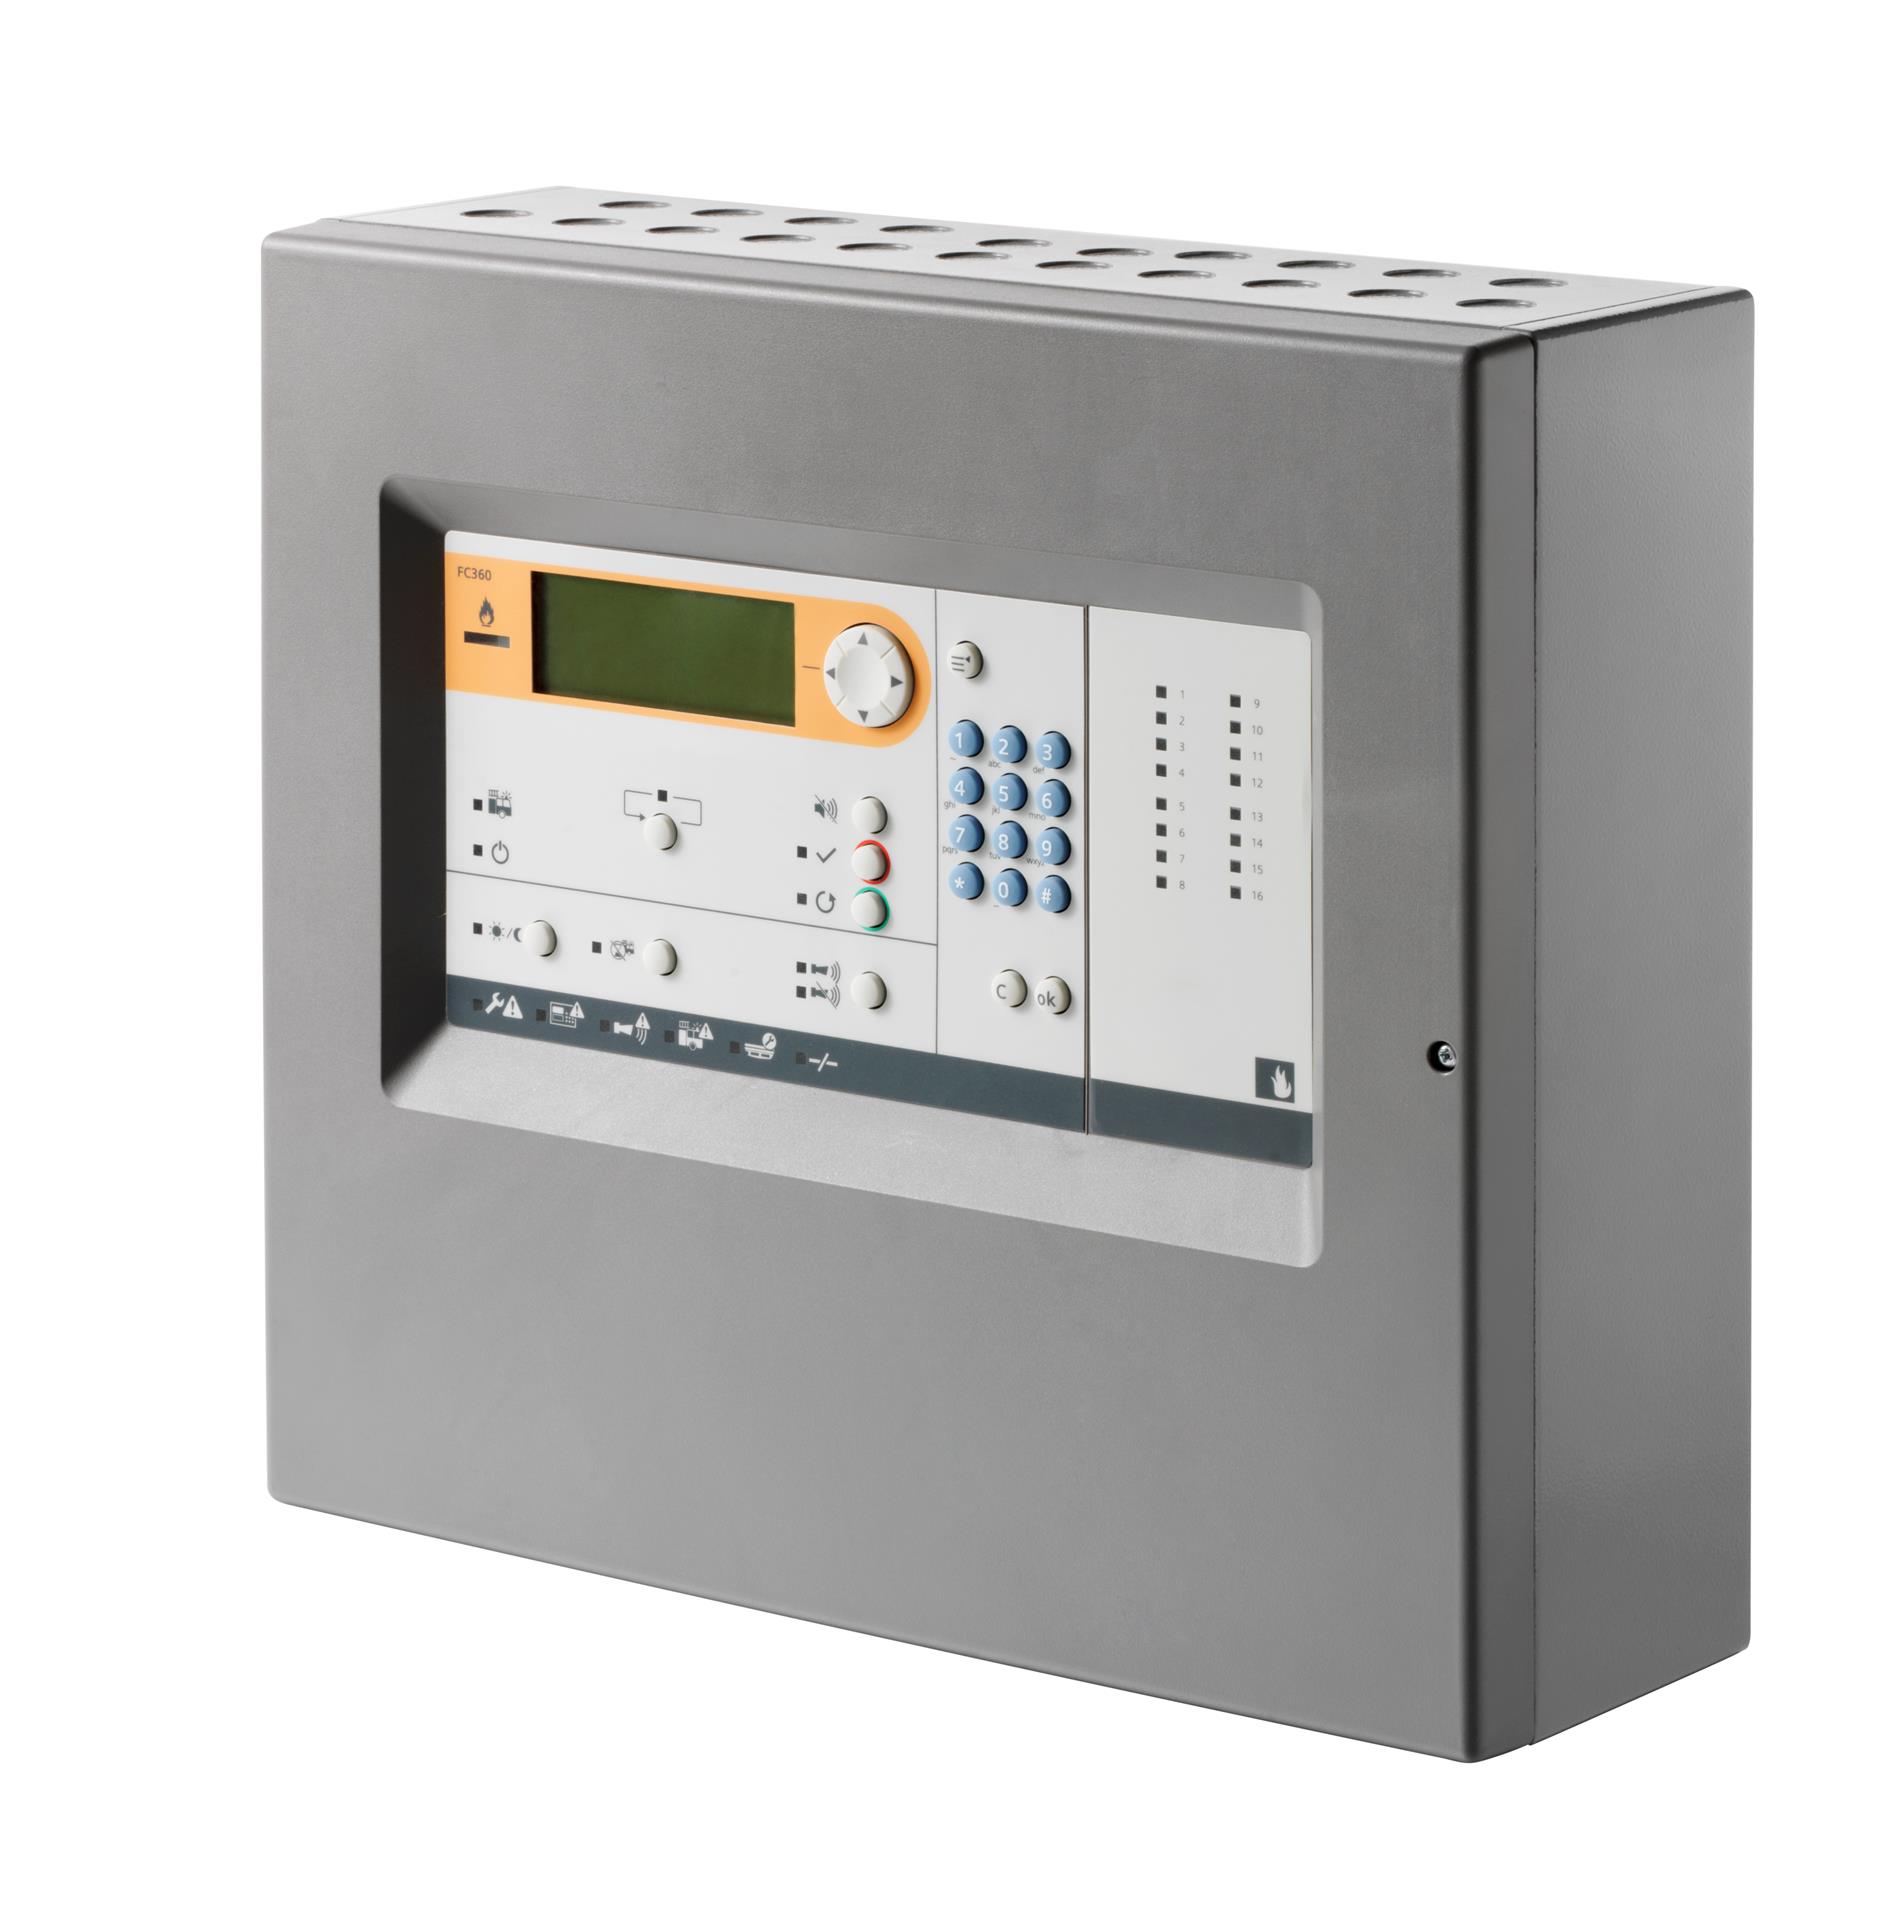 SIEMENS FC361-YZ Cerberus FIT Interactive Fire Detection and Alarm Control Panel – Compact Case and LED Indicator (1 loop, 126 addresses)